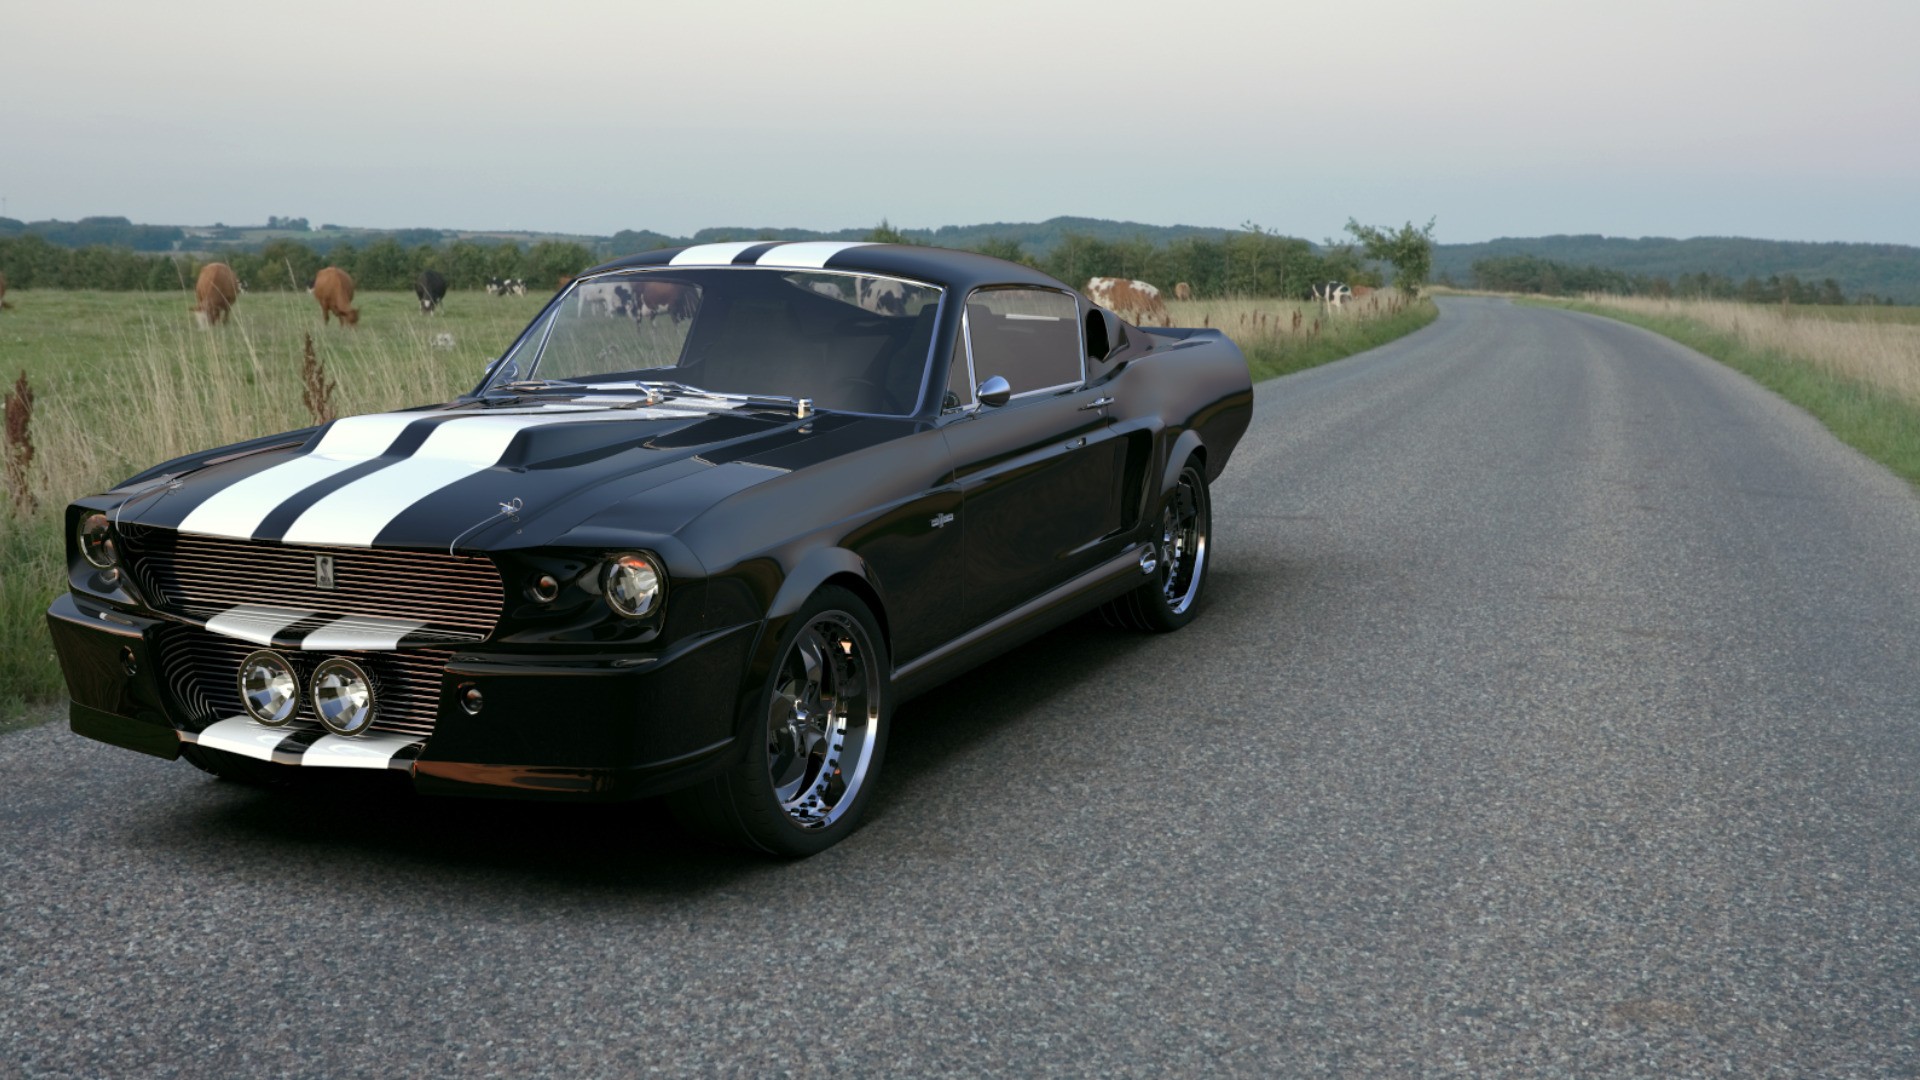 General 1920x1080 car road black cars Ford American cars racing stripes muscle cars vehicle Ford Mustang